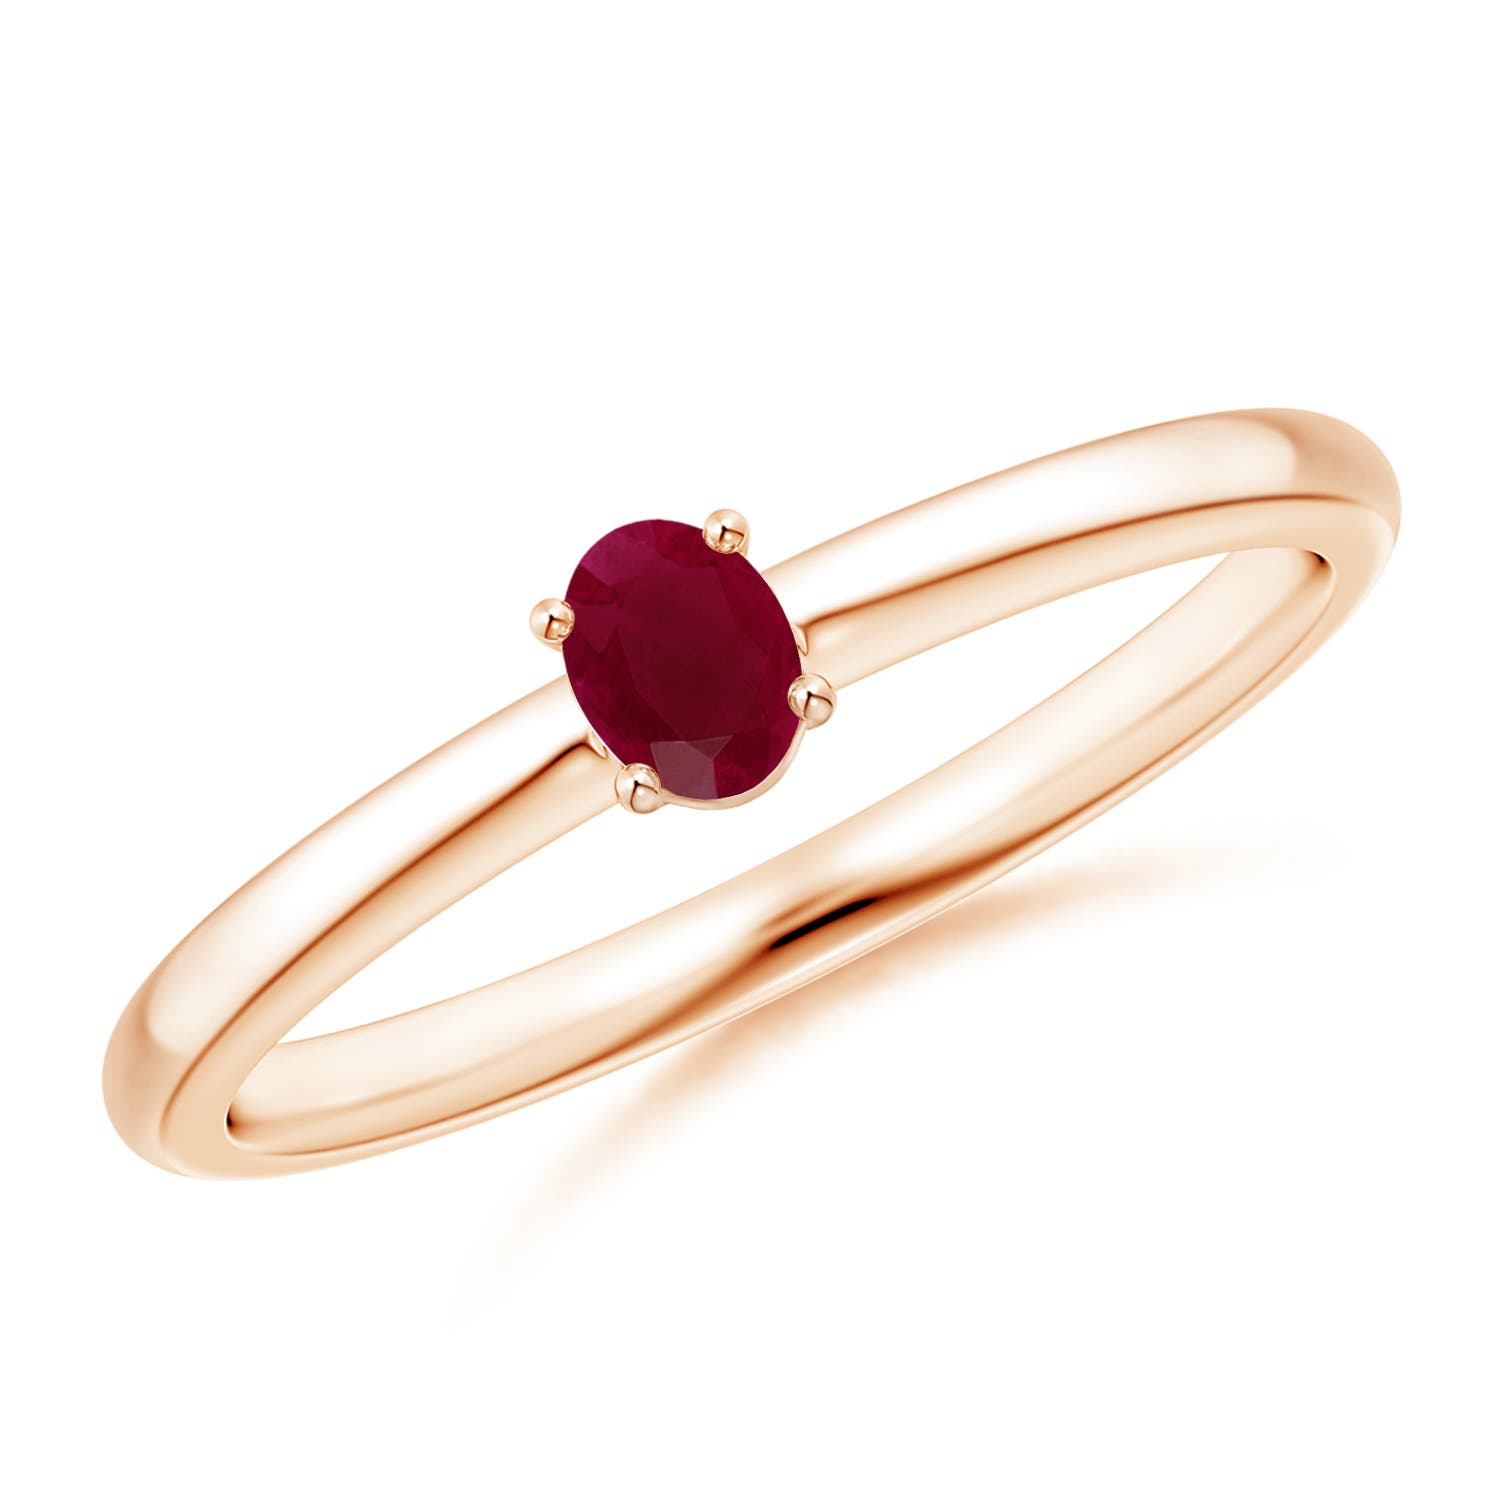 A - Ruby / 0.2 CT / 14 KT Rose Gold